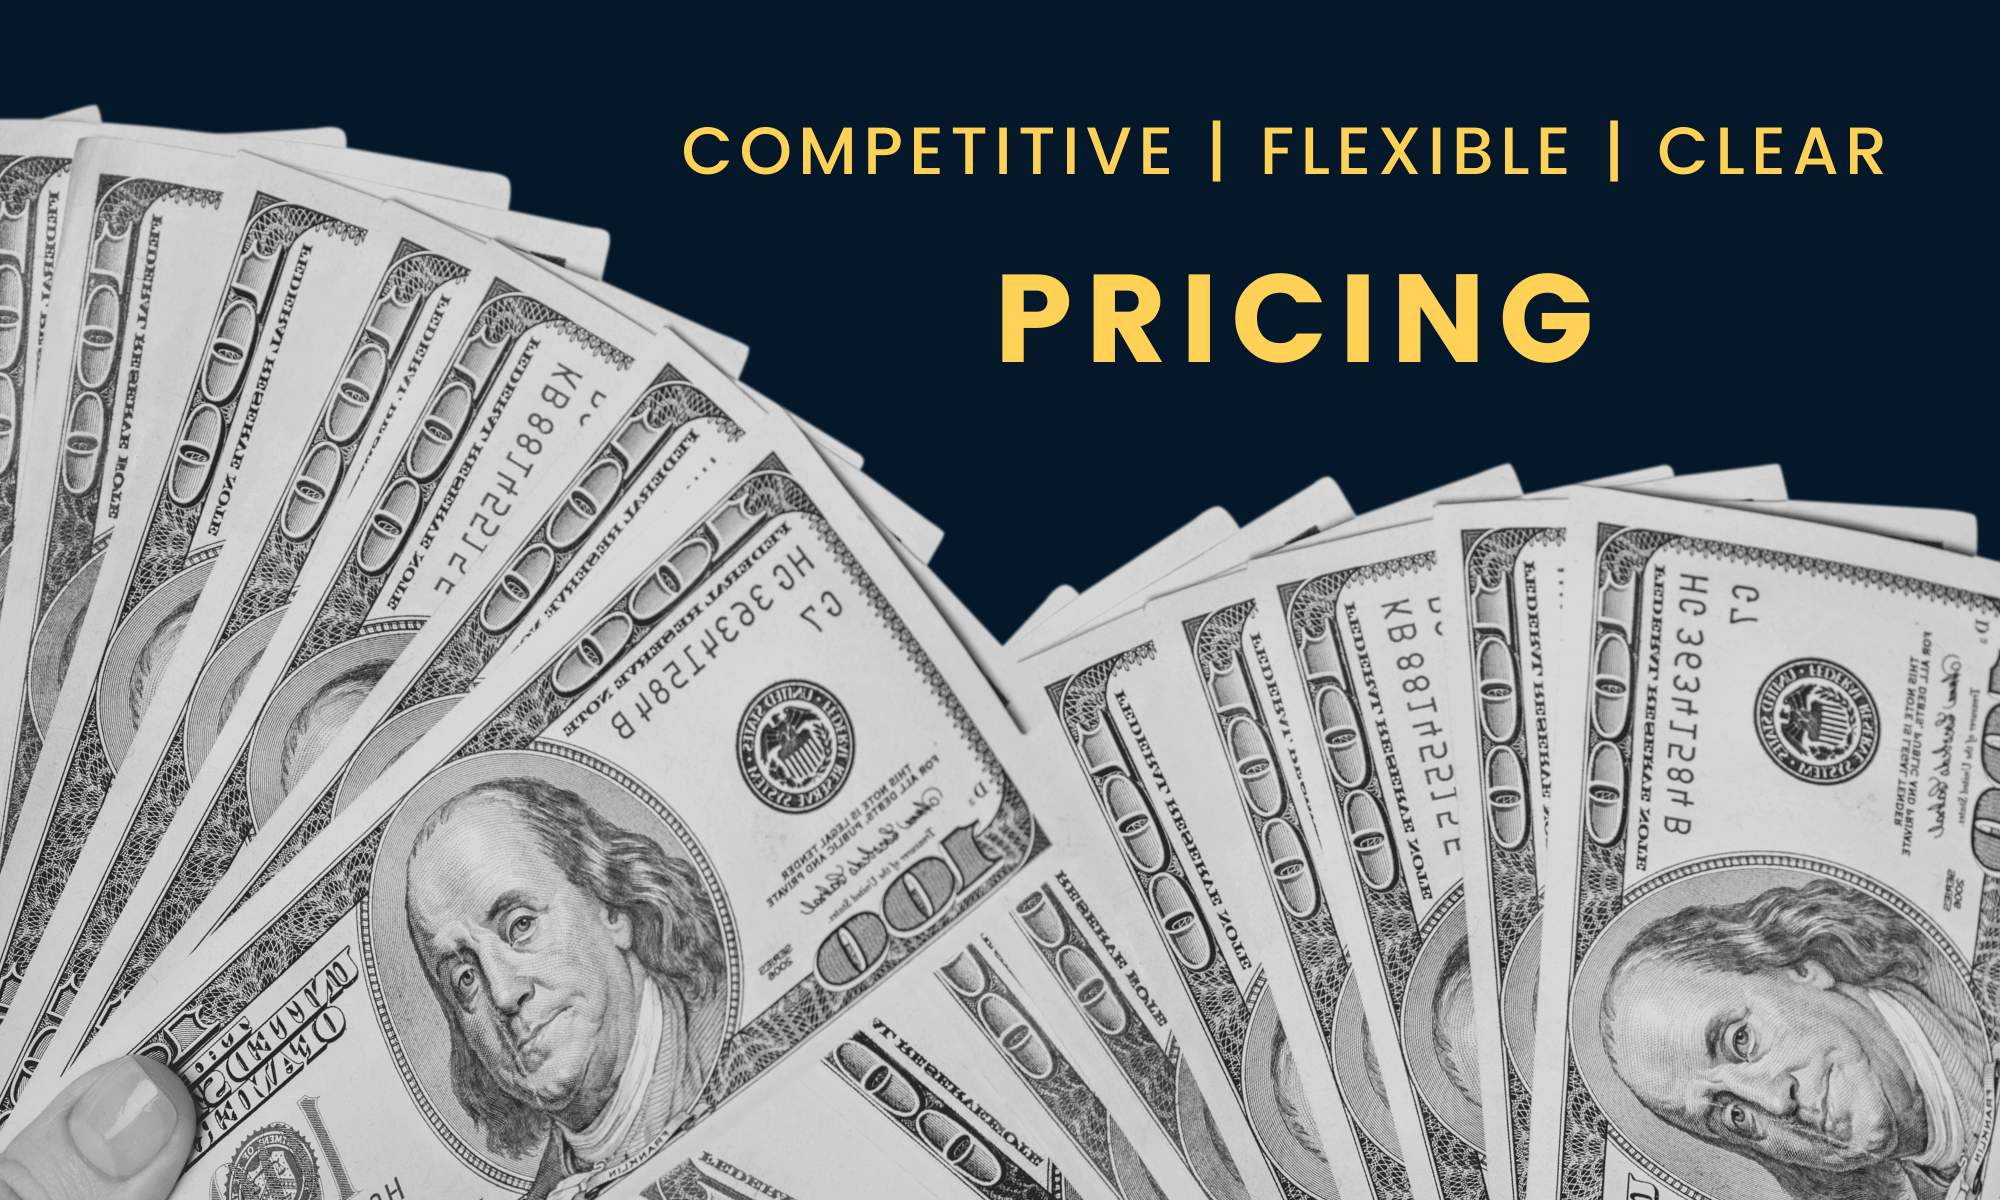 Blue background with hundred-dollar bills fanned out and the words COMPETITIVE | FLEXIBLE | CLEAR PRICING